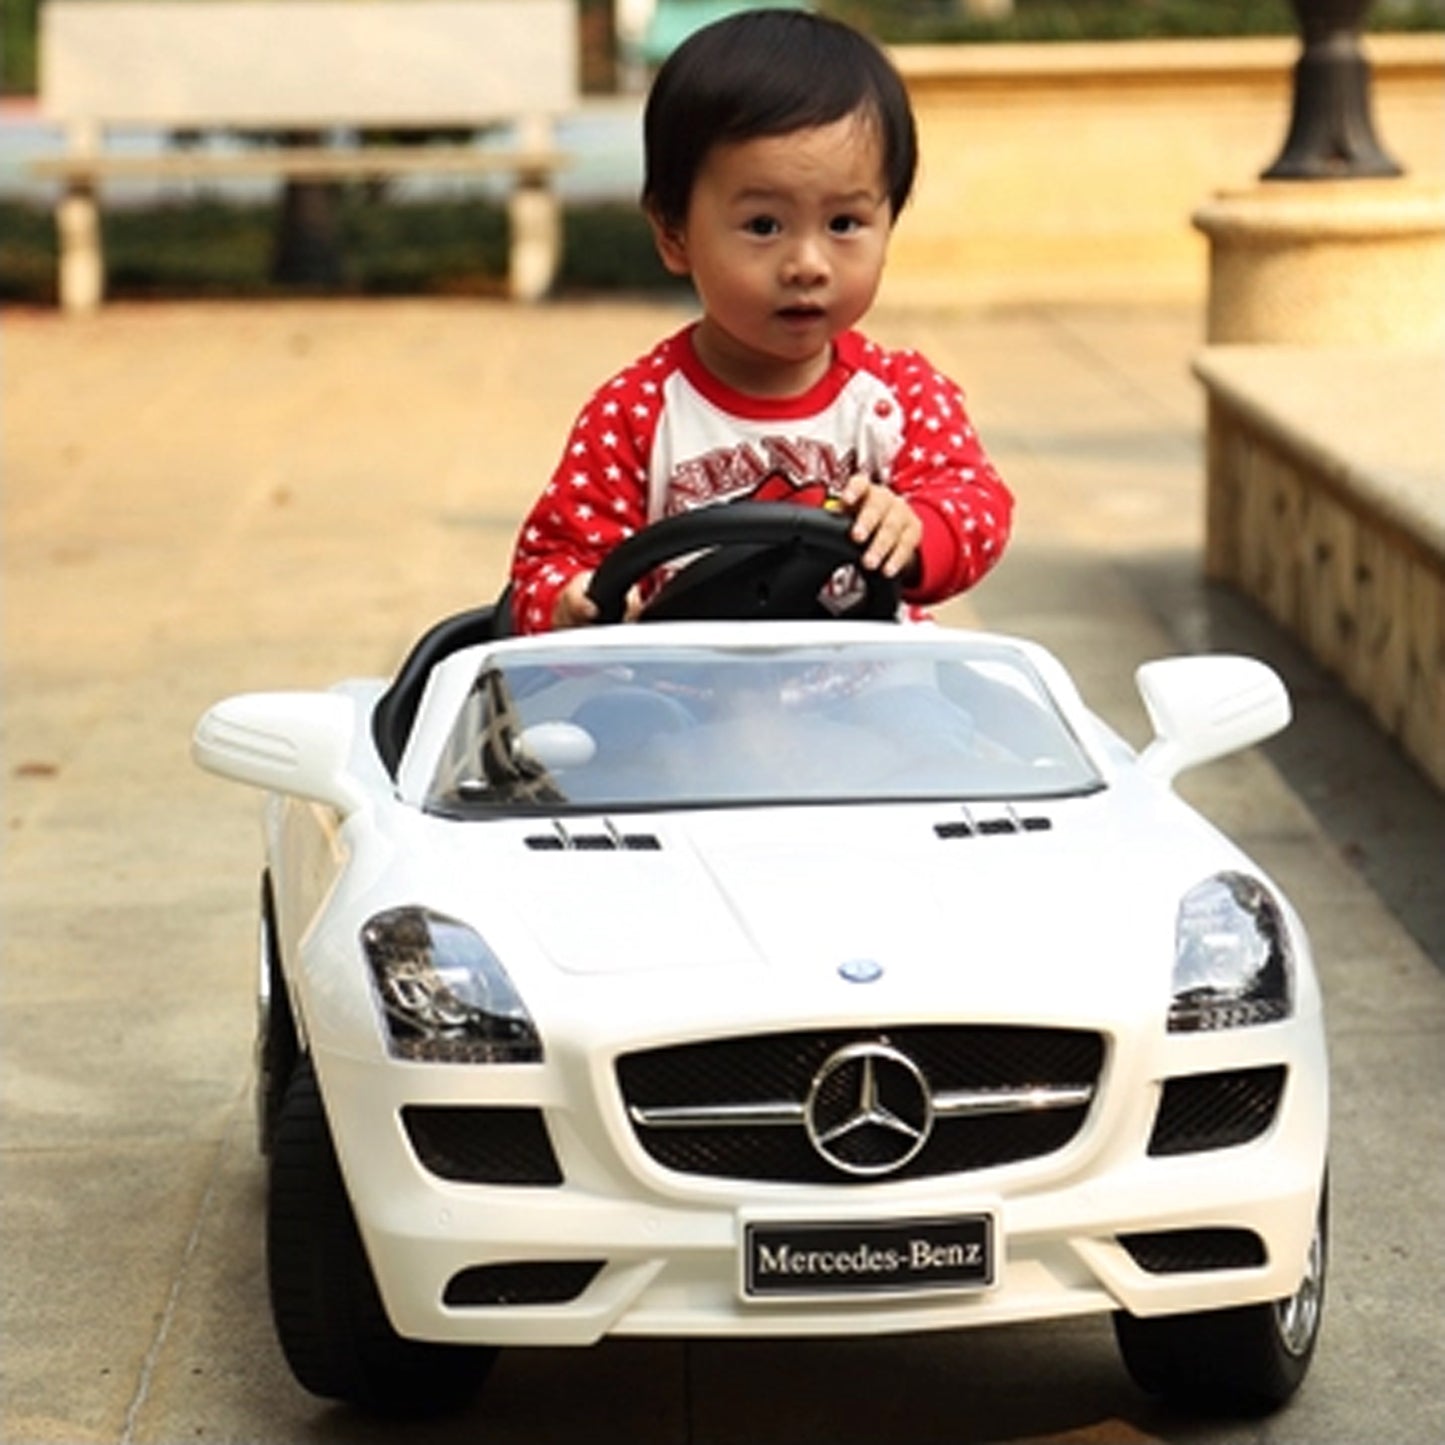 Mercedes Benz SLS AMG(Without Packing)